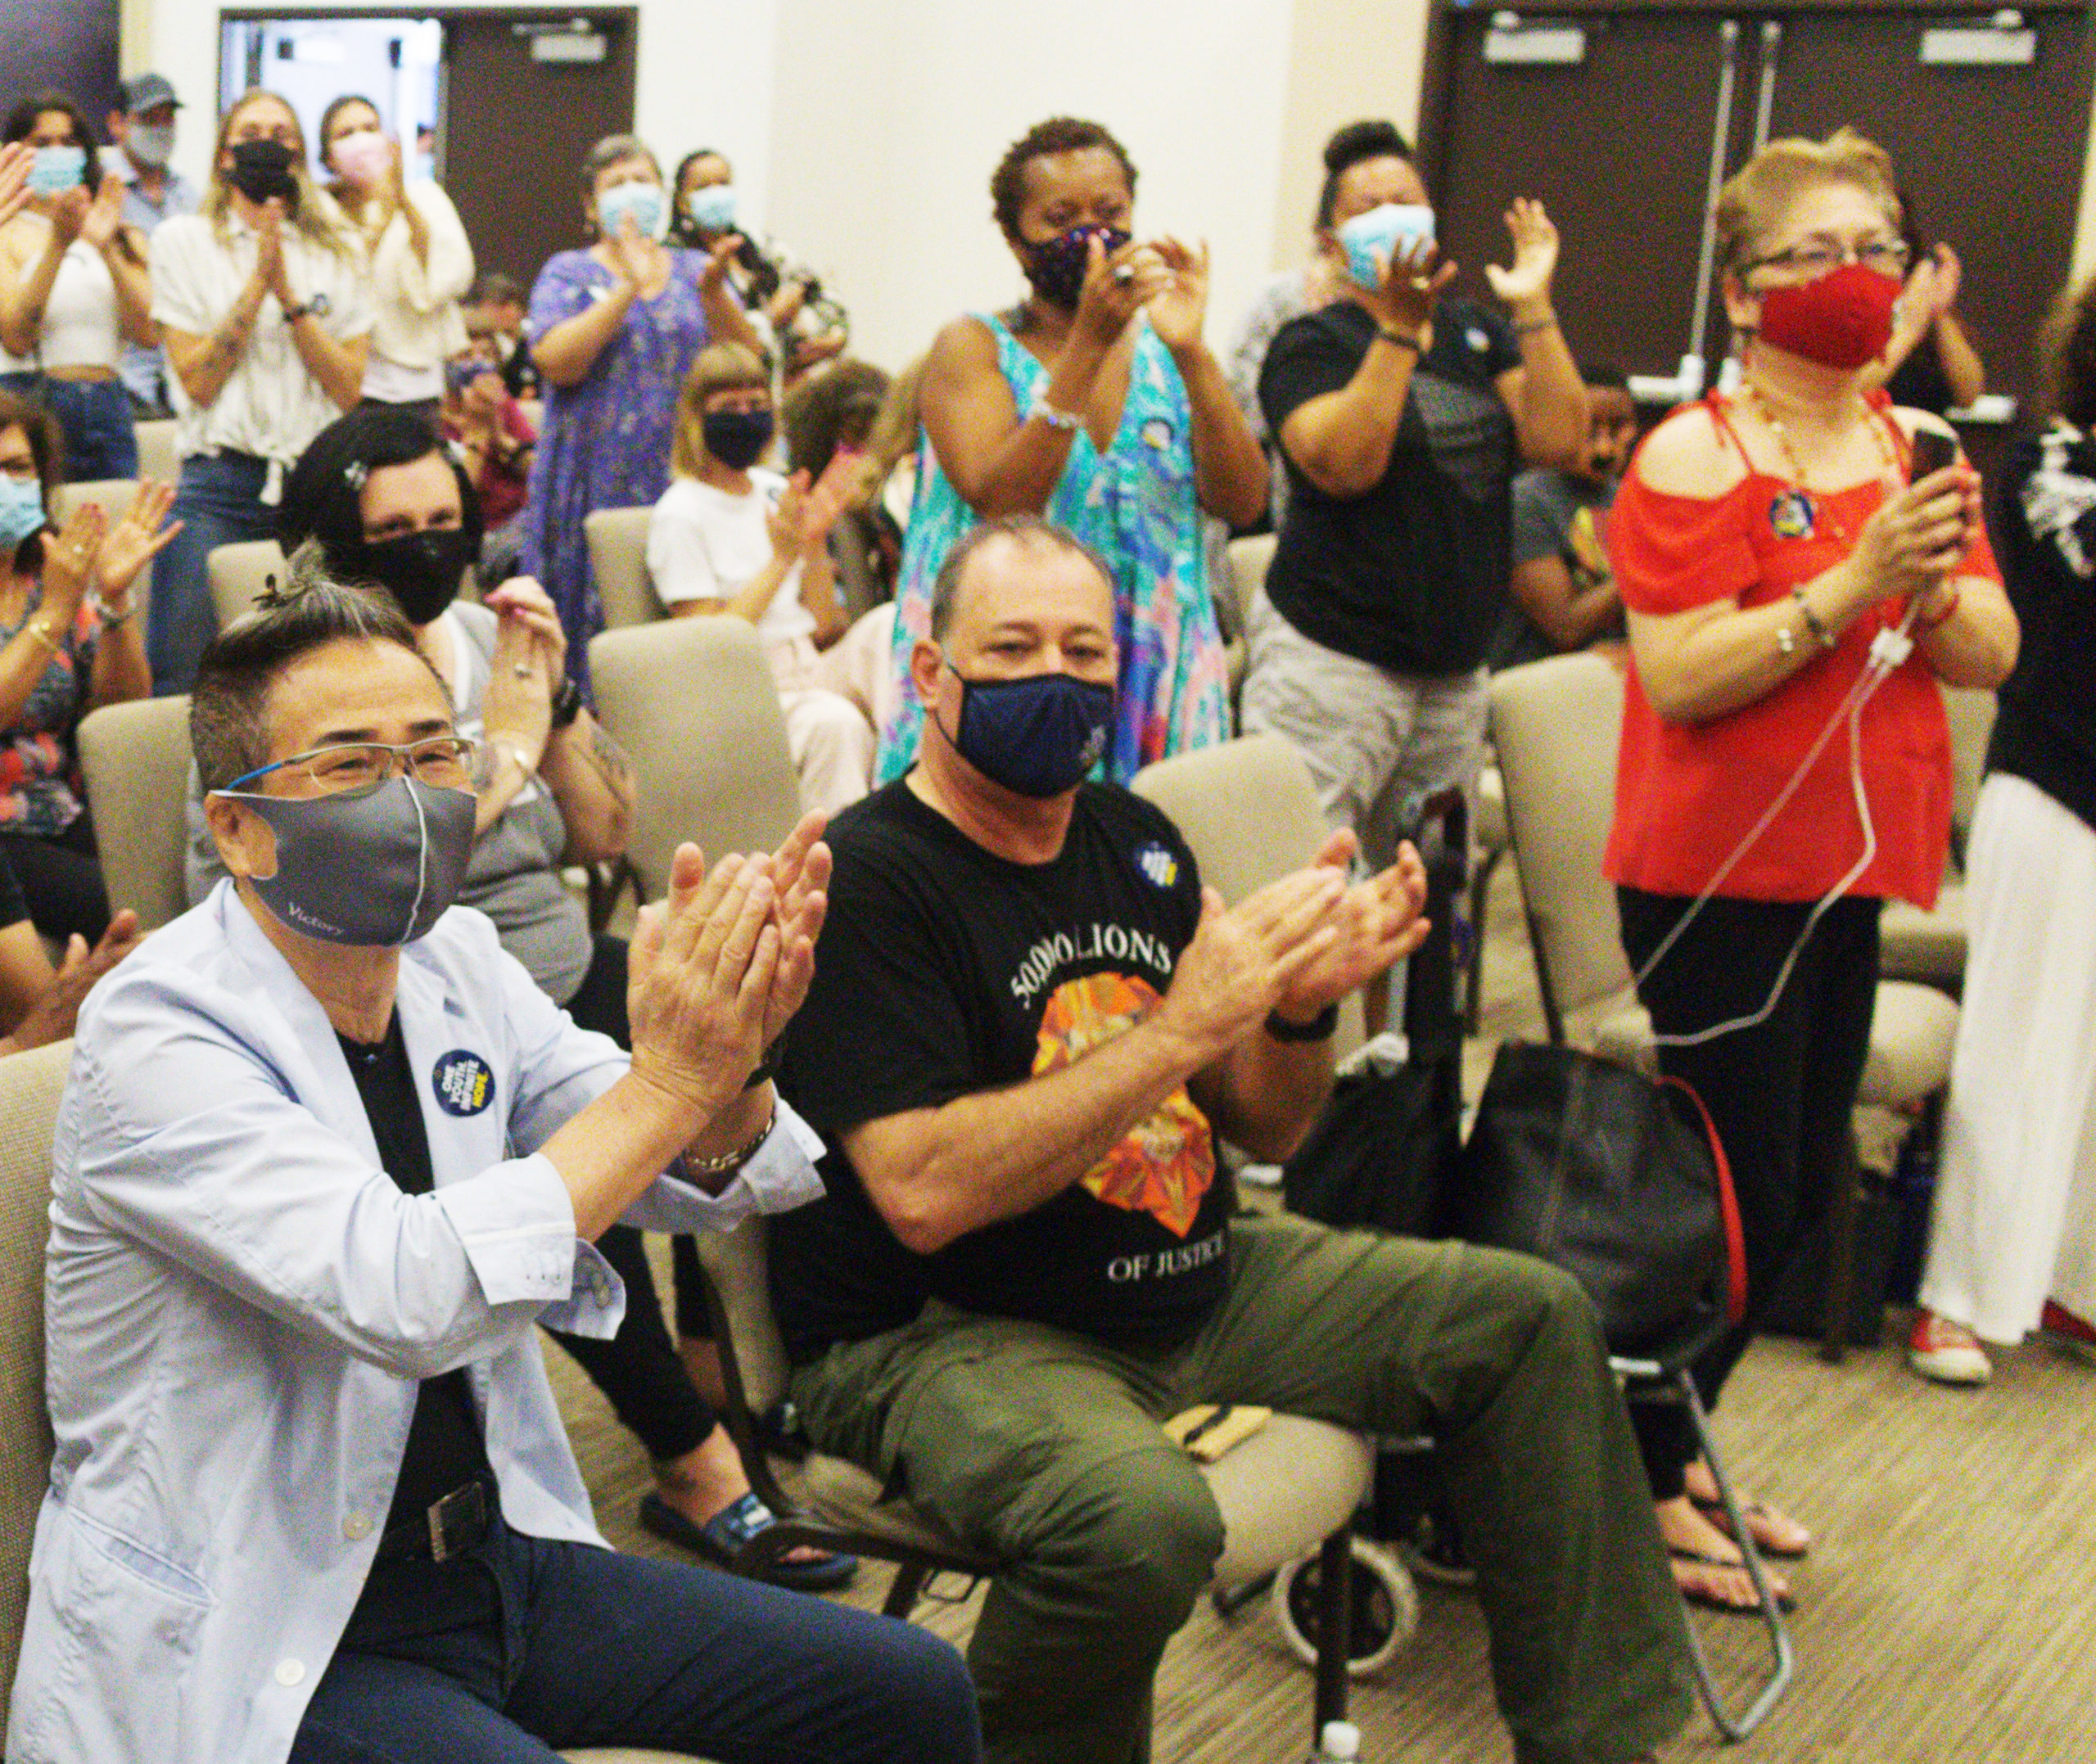 SGI-USA members gather for an August Kosen-rufu Gongyo Meeting at the reopening of the Los Angeles Friendship Center, Los Angeles, Calif., Aug. 1, 2021.